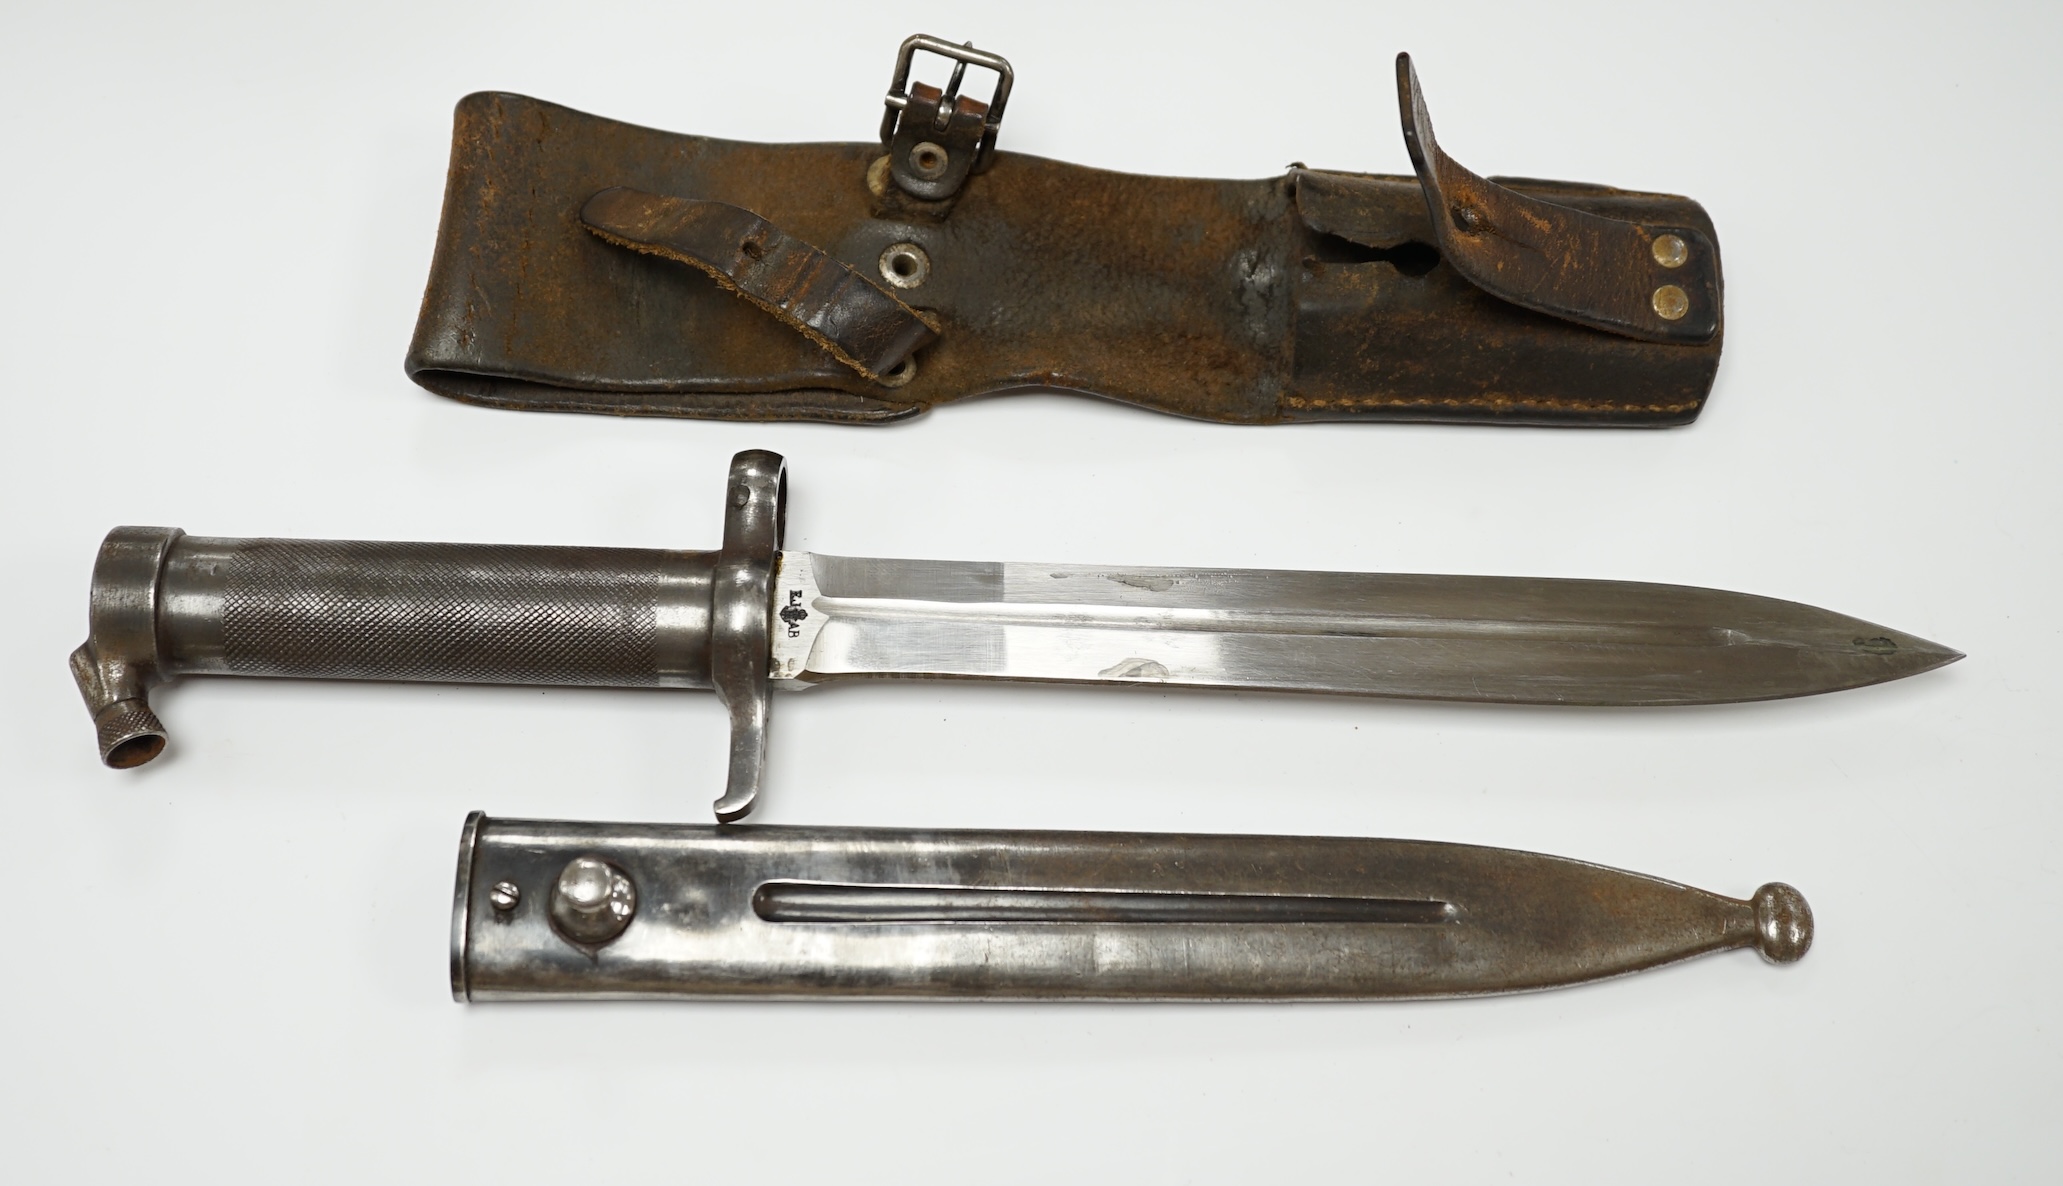 A Swedish Mauser bayonet, chequered grip in its steel scabbard with leather frog. Condition - good